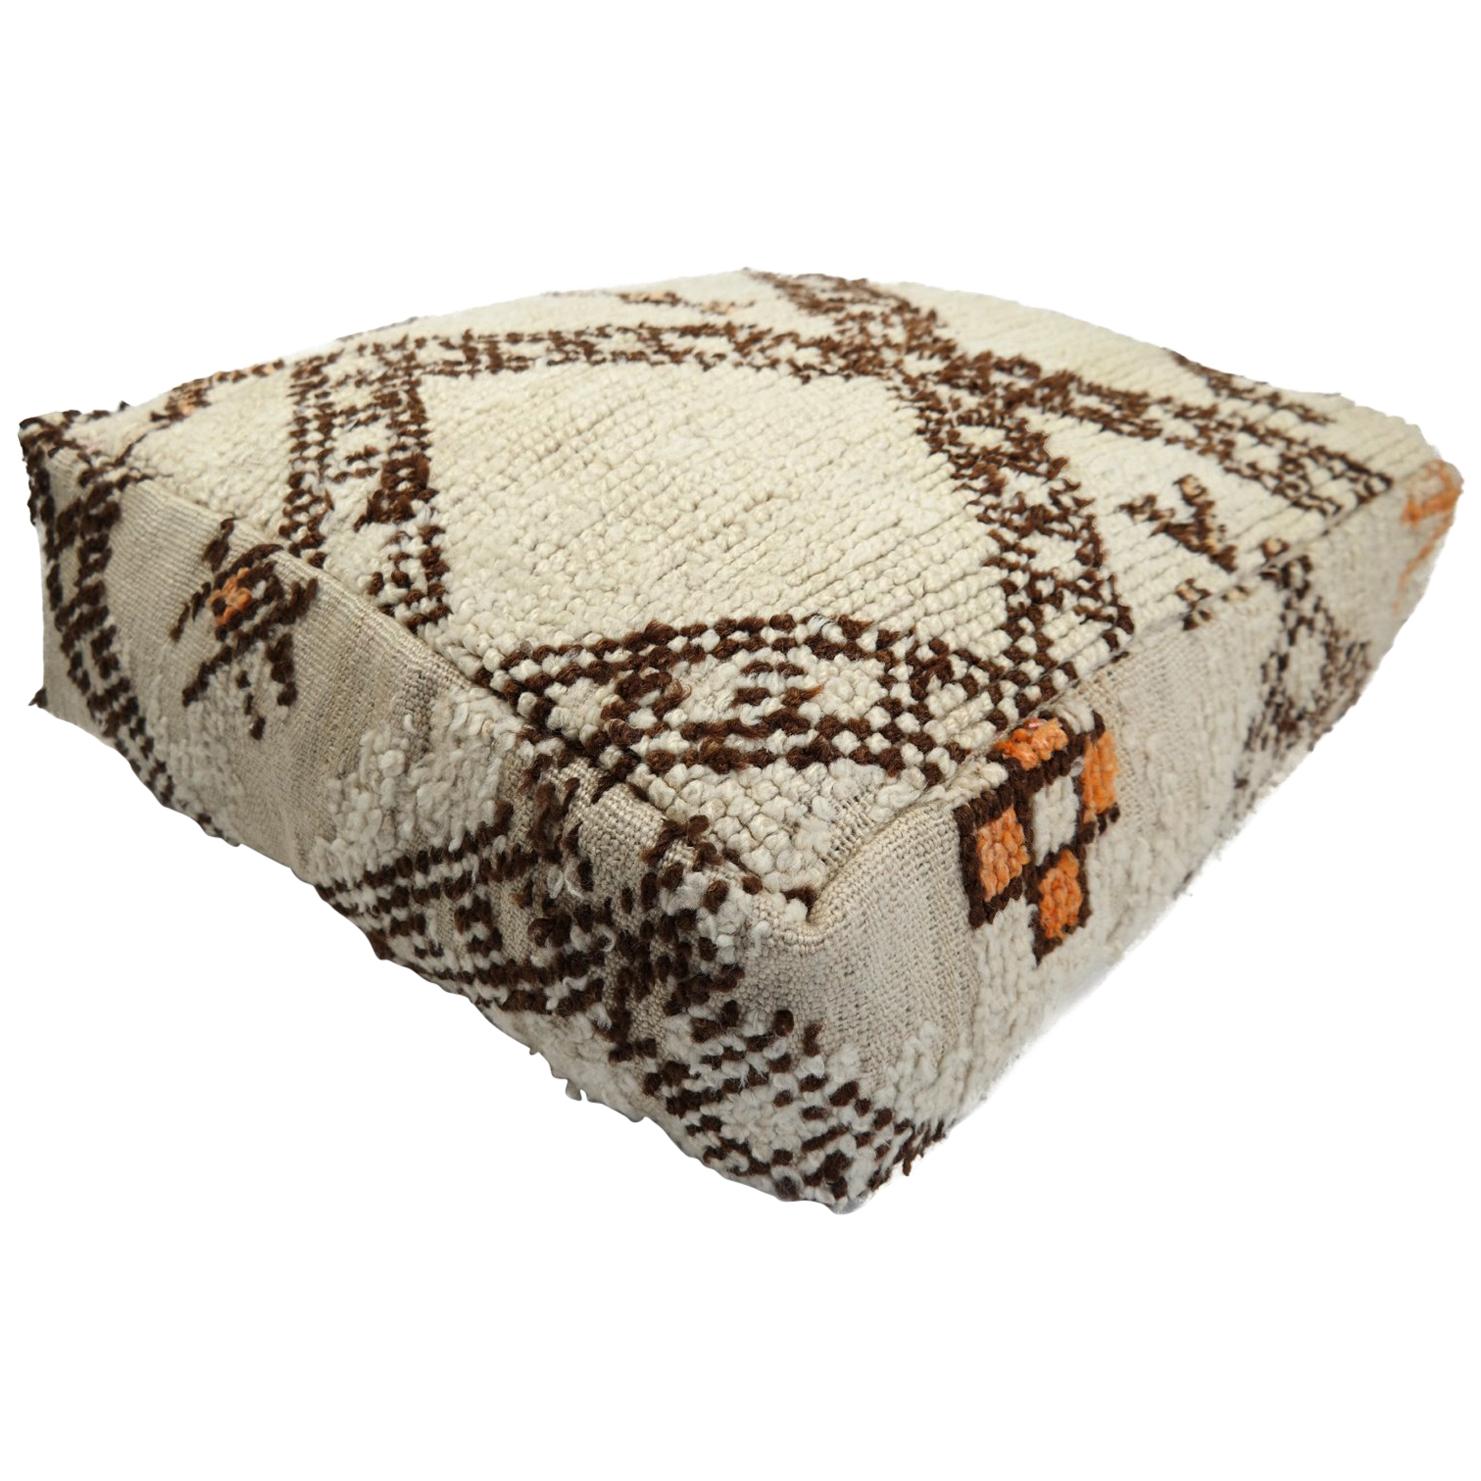 Pouf from Morocco Natural Floor Cushion Moroccan Ottoman For Sale